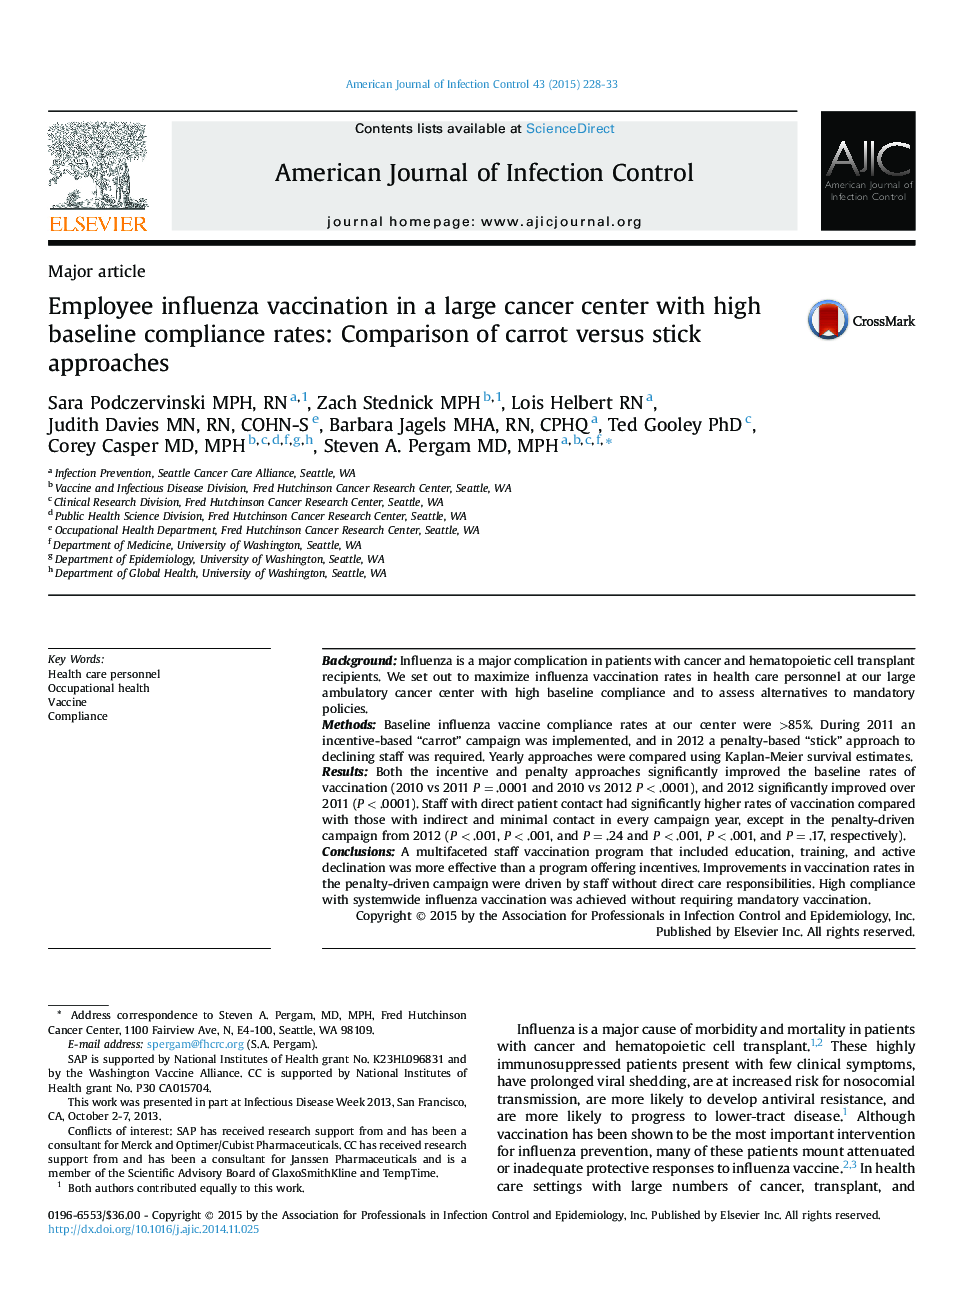 Employee influenza vaccination in a large cancer center with high baseline compliance rates: Comparison of carrot versus stick approaches